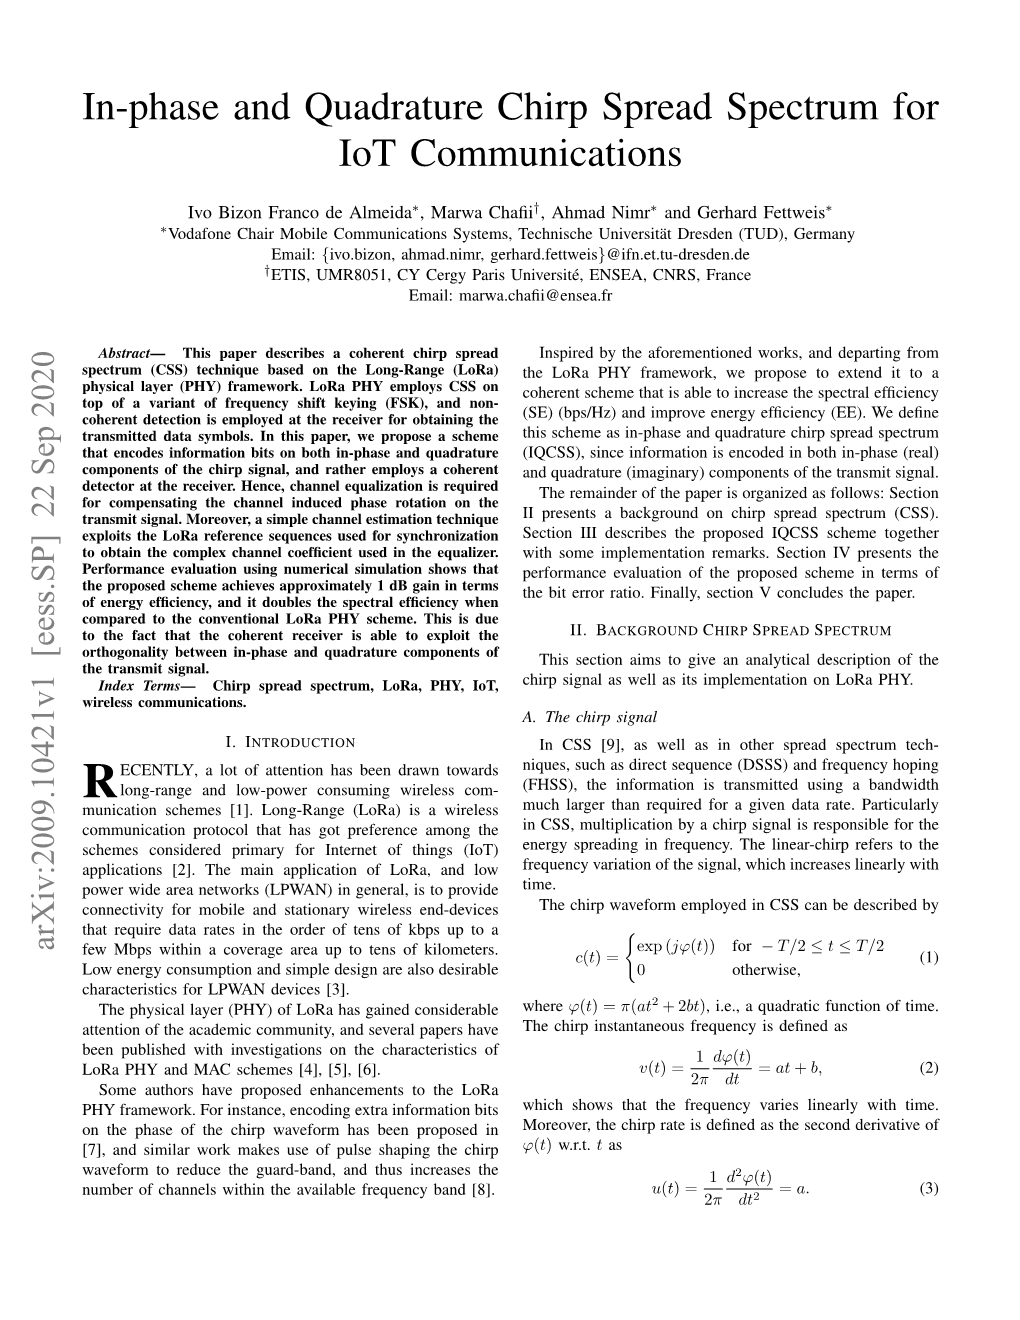 In-Phase and Quadrature Chirp Spread Spectrum for Iot Communications